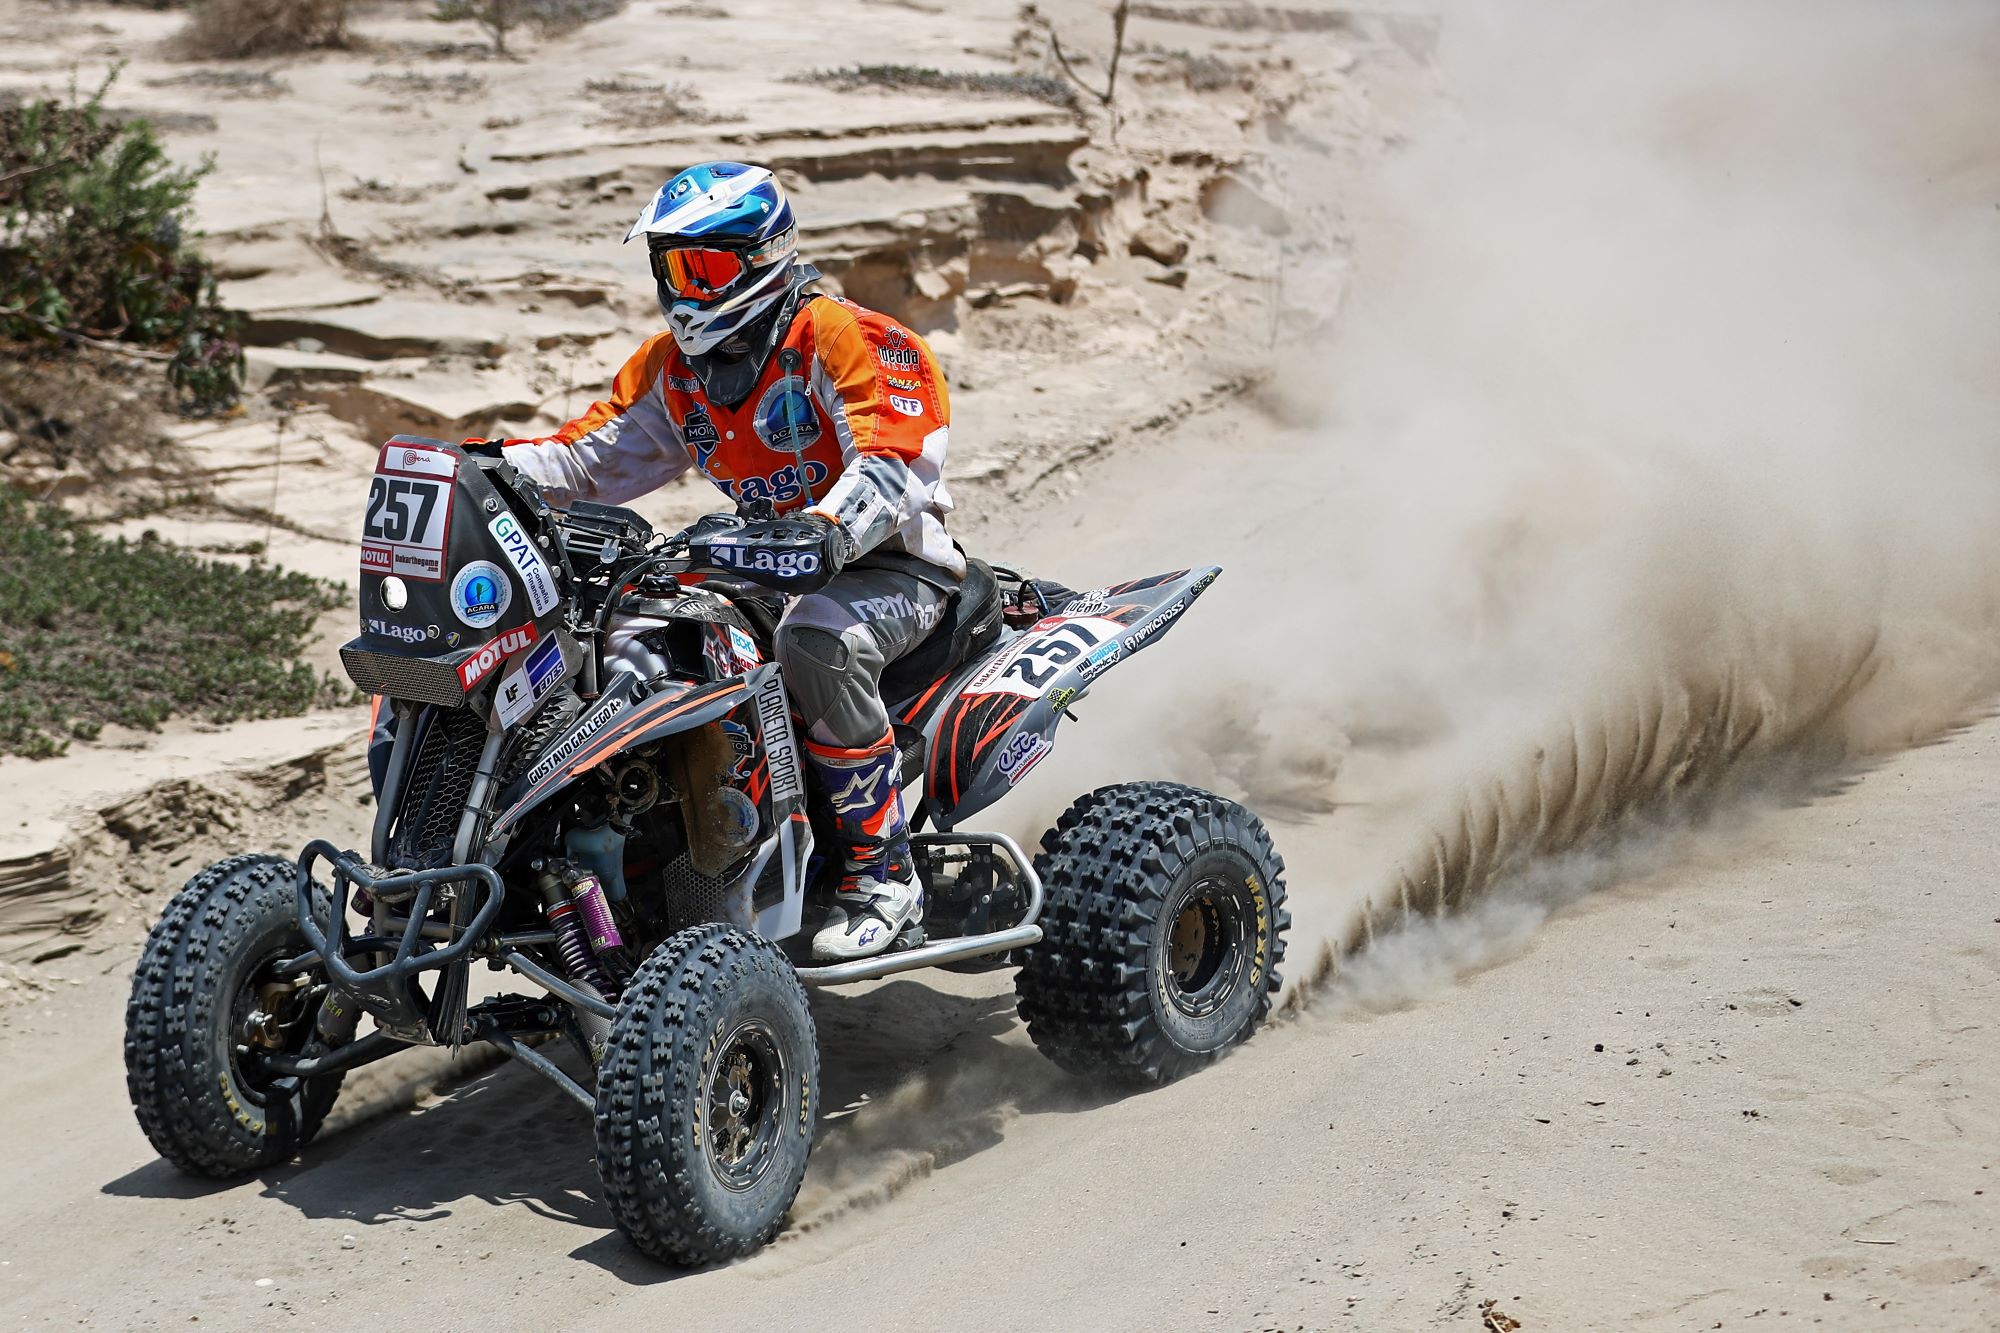 A person riding on an ATV in a dessert area.